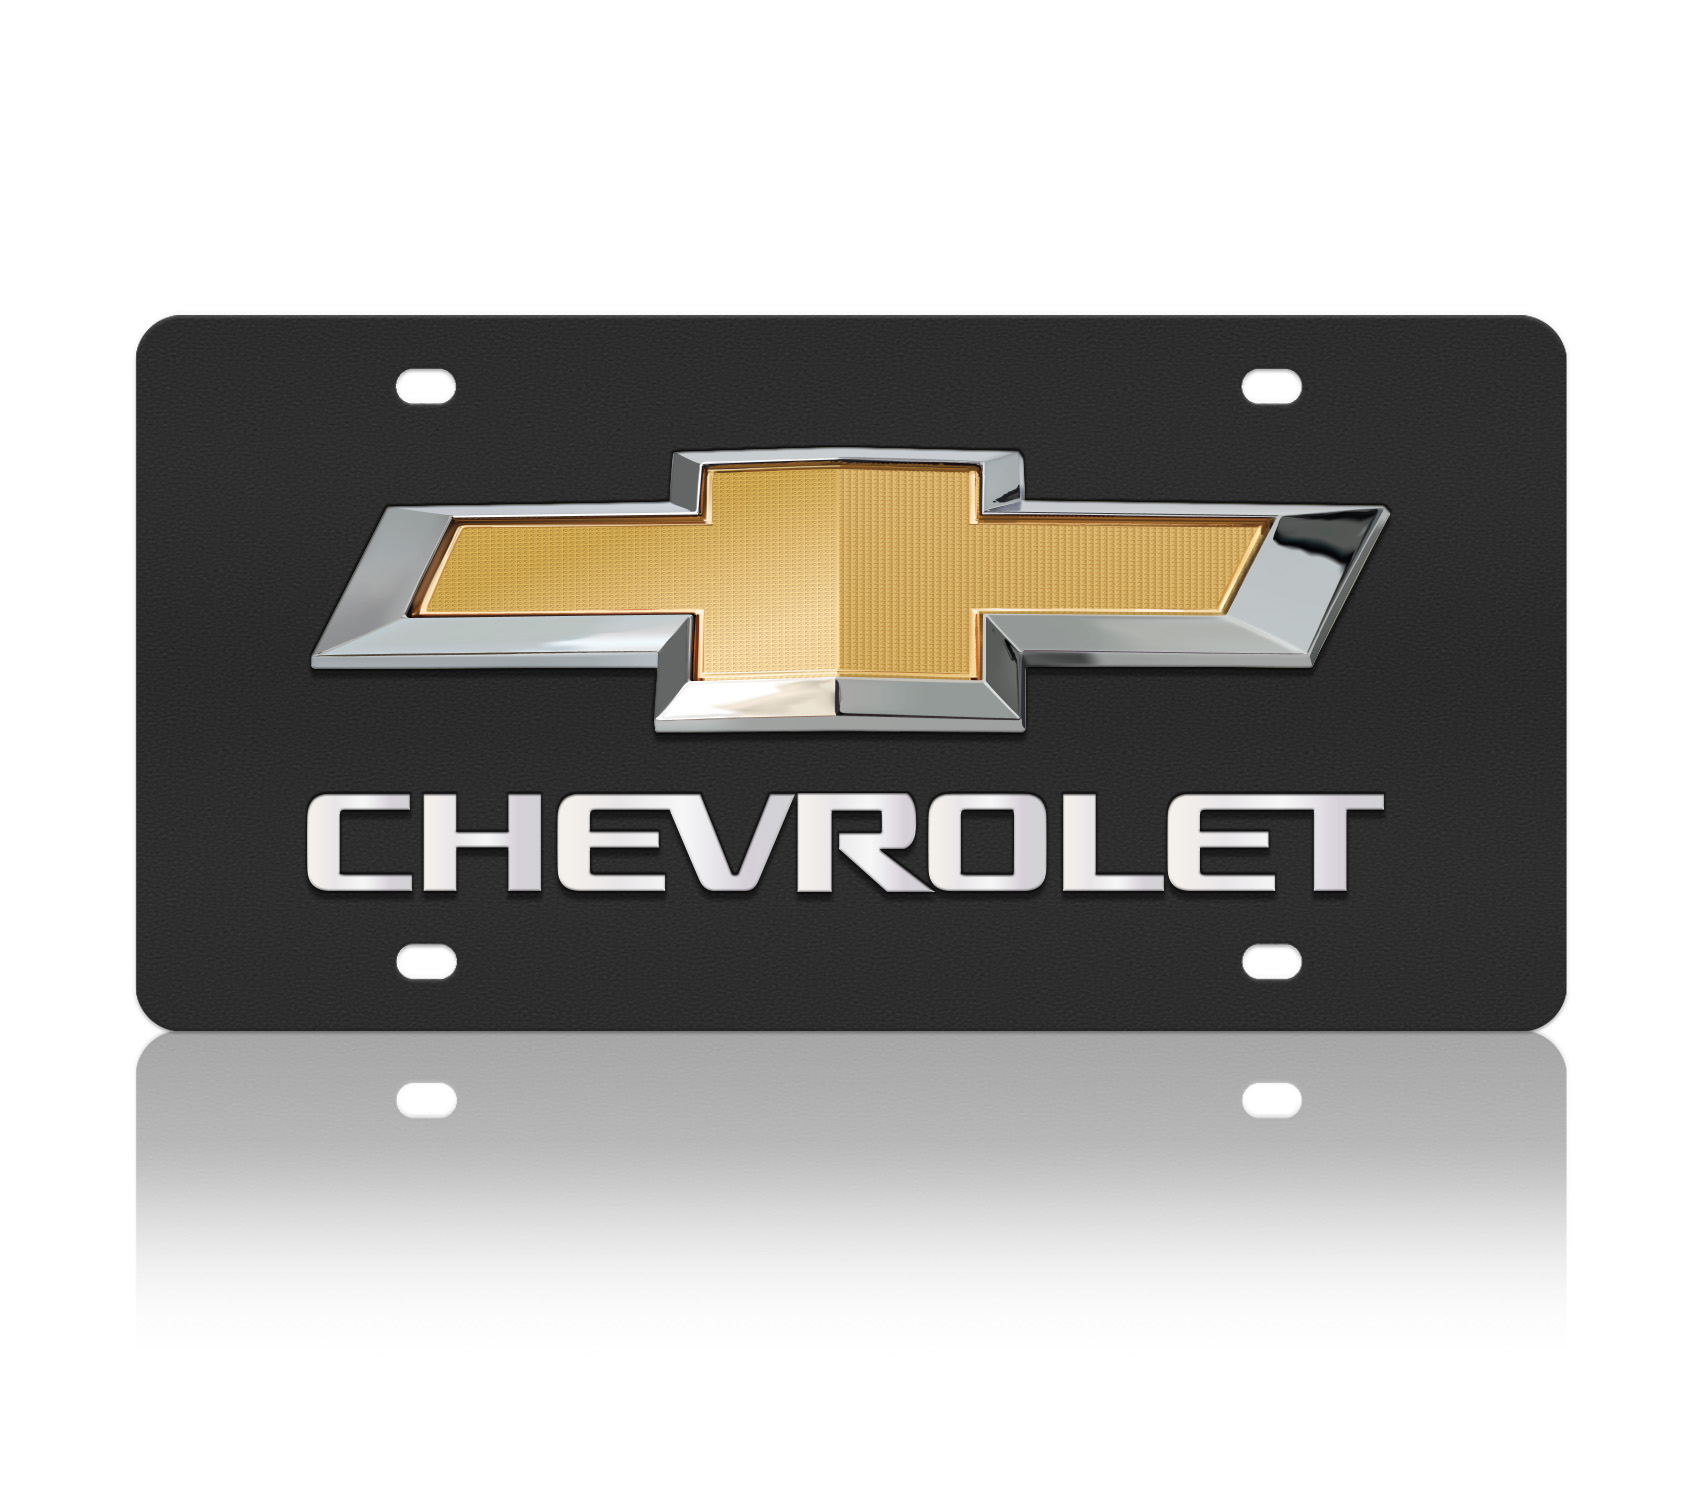 Carbon Steel License Plate - Chevrolet Bowtie and word